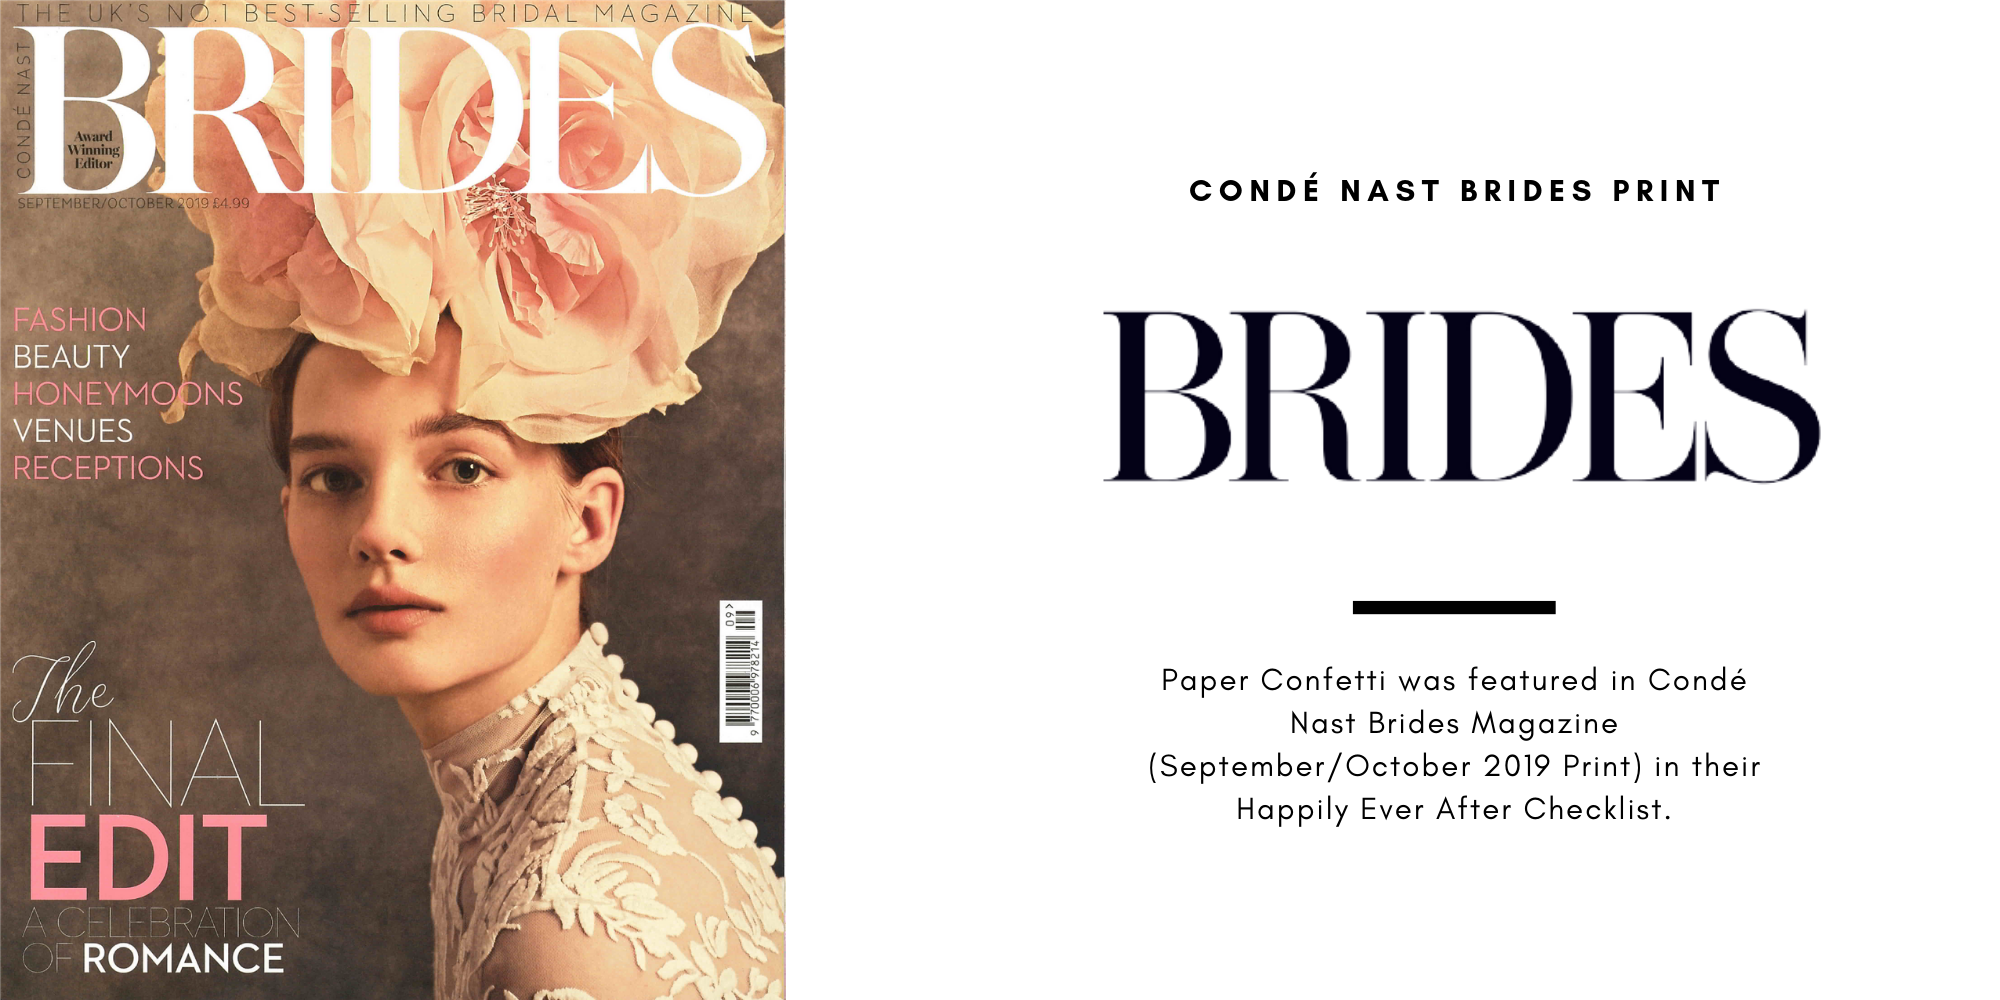 Paper Confetti was featured in Condé Nast Bride Print in the Happily Ever After Checklist in their September/October Issue for our exclusive customizable rose gold champagne bottle balloons. A picture is featured of two girls in wedding gowns holding a rose gold champagne bottle balloon.